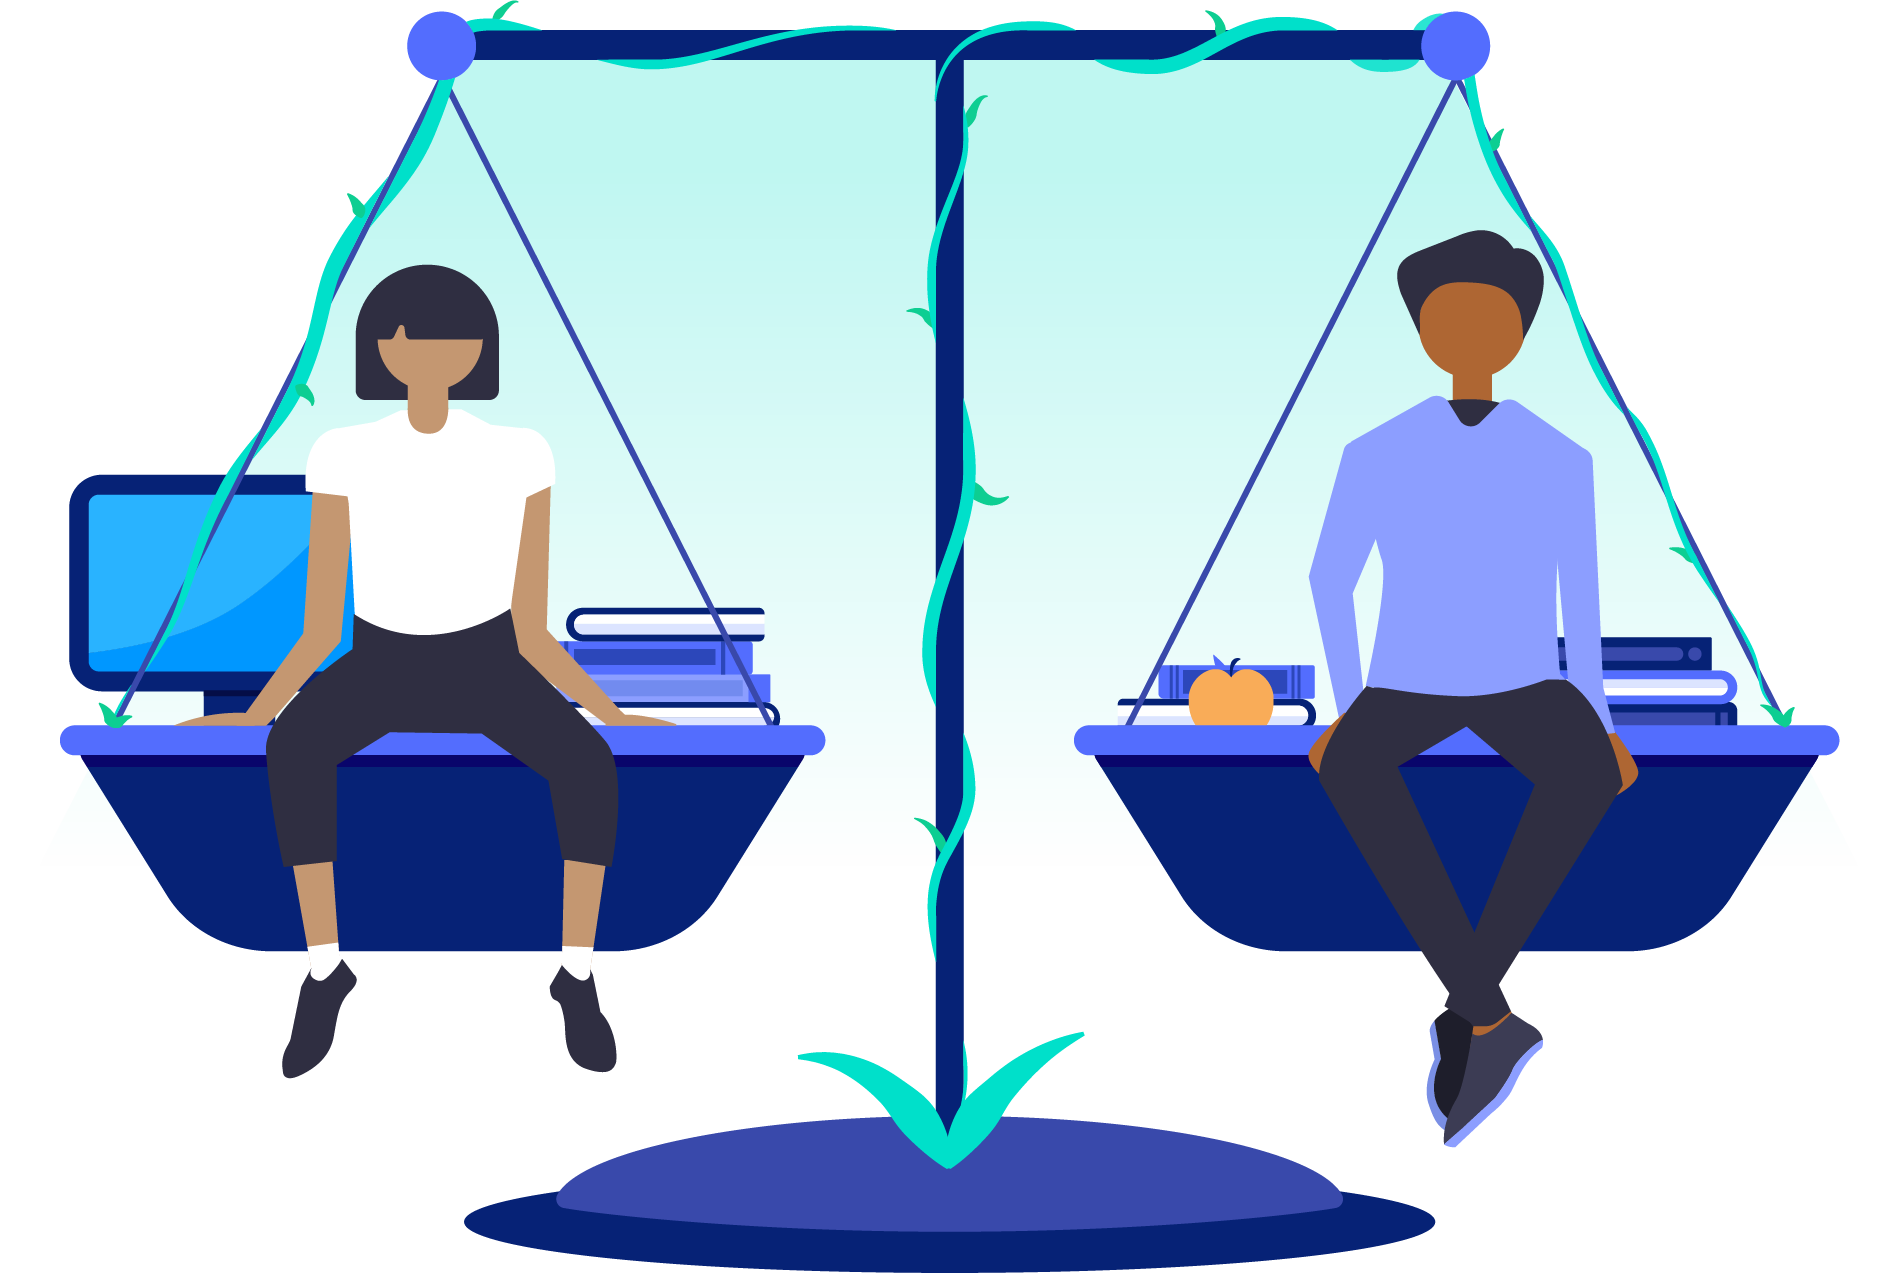 Two people sitting on scales of justice